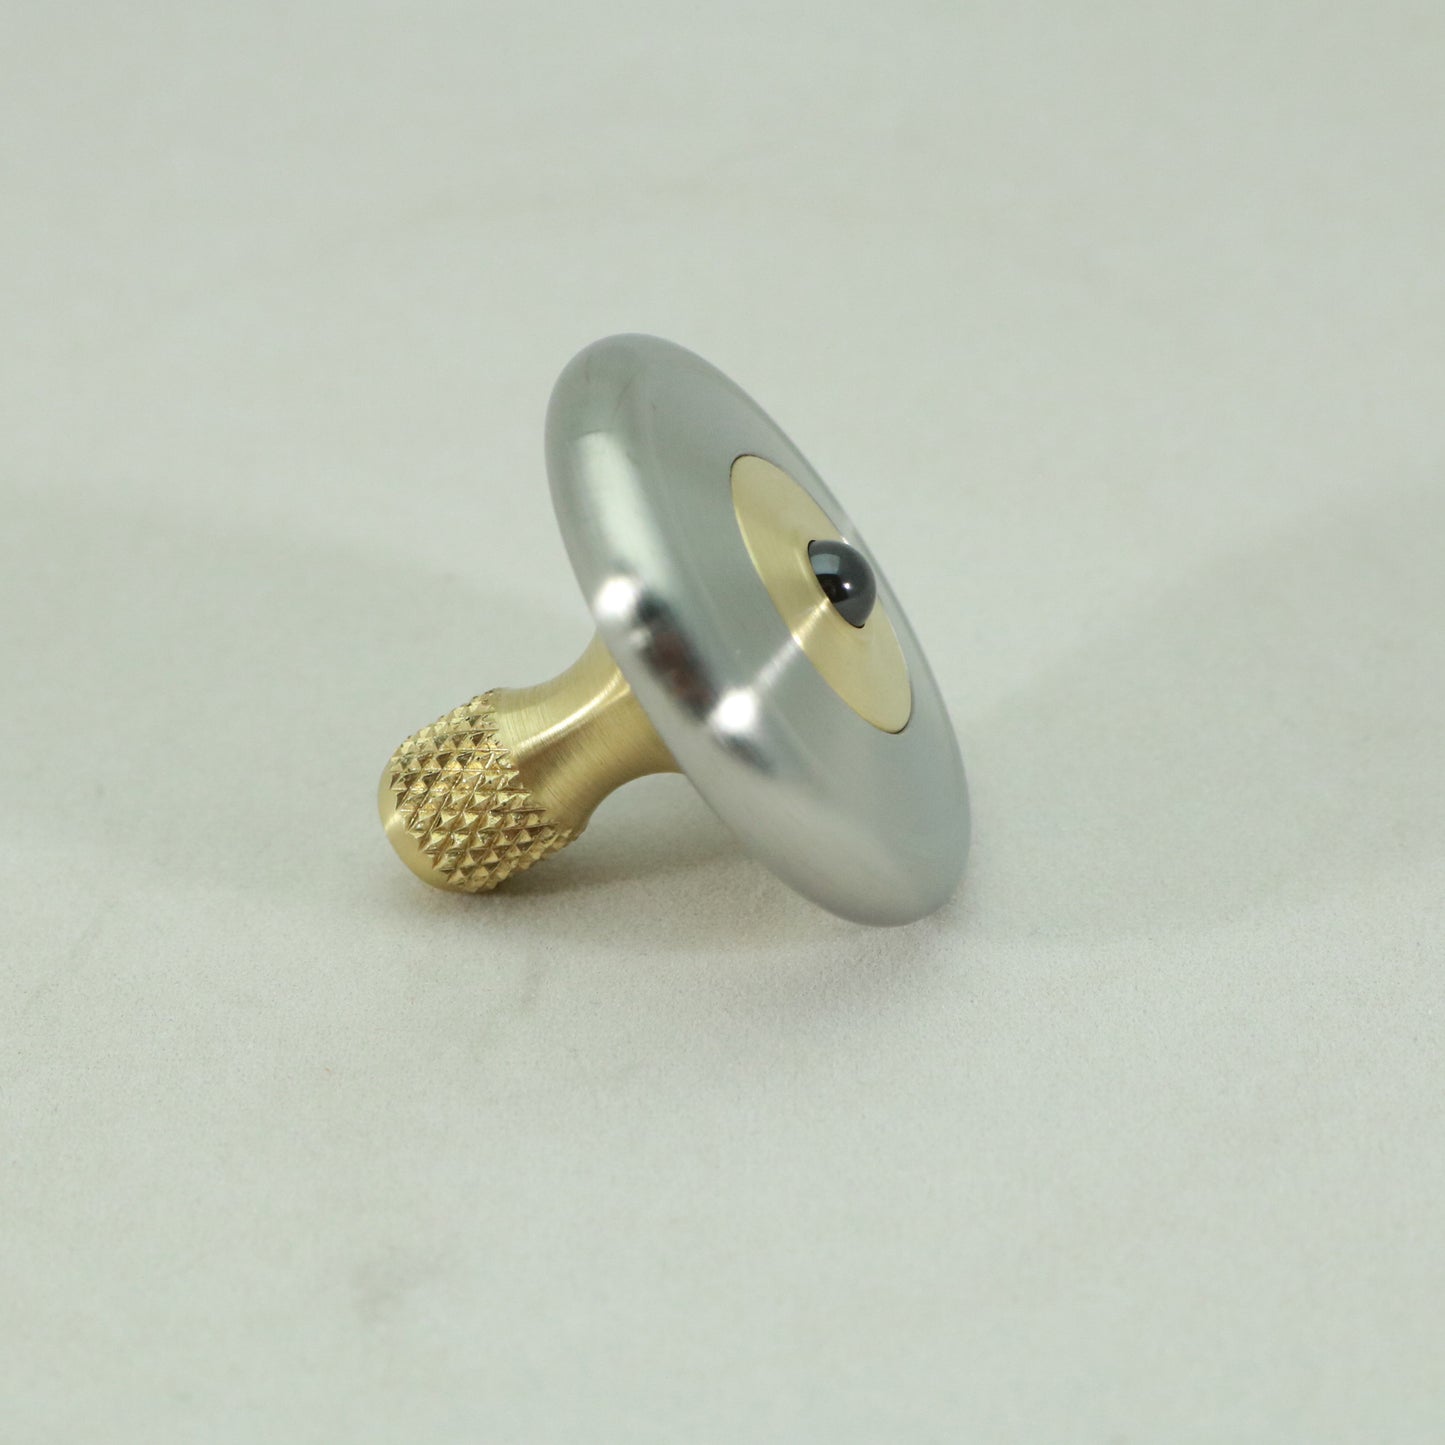 M3 - Brushed Stainless Steel and Brass Spinning Top